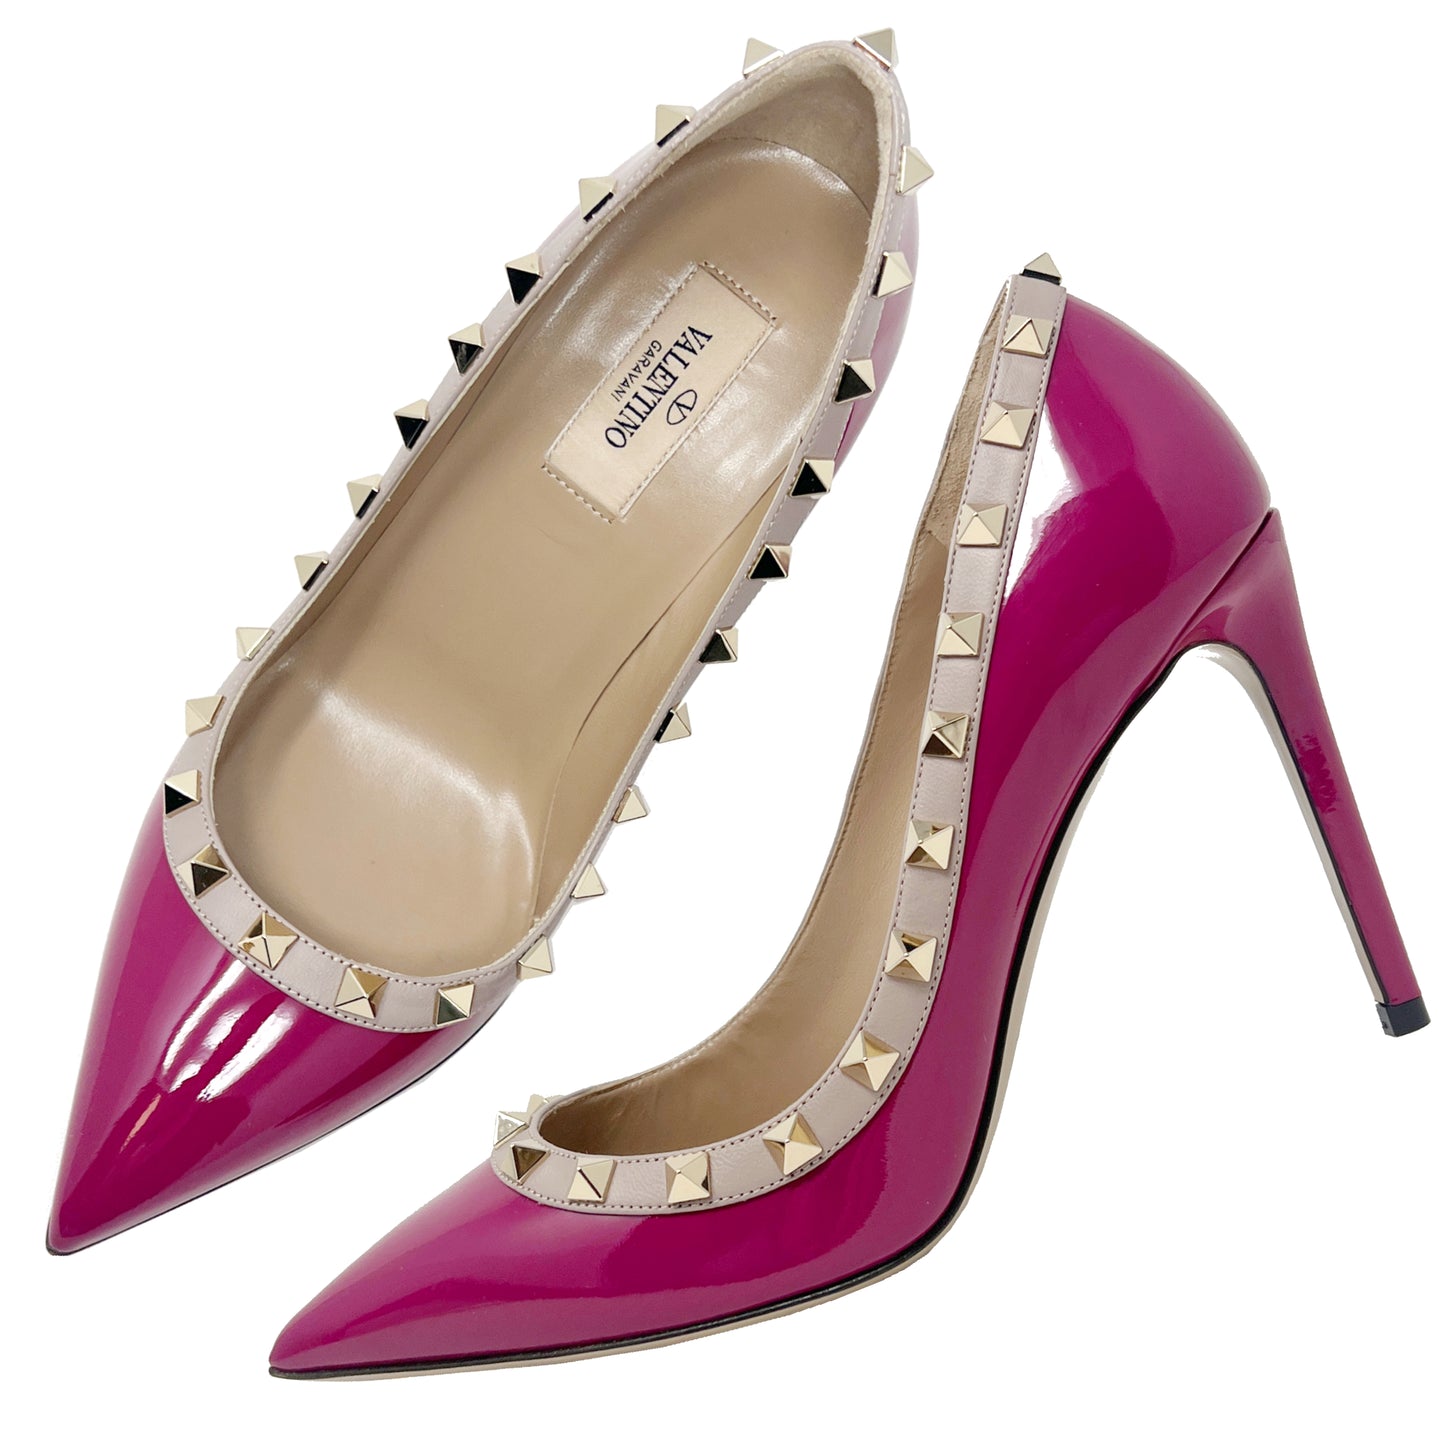 Valentino Rockstud Studded Two Tone Pink Patent Leather Pointed Pumps Heels Size EU 37.5